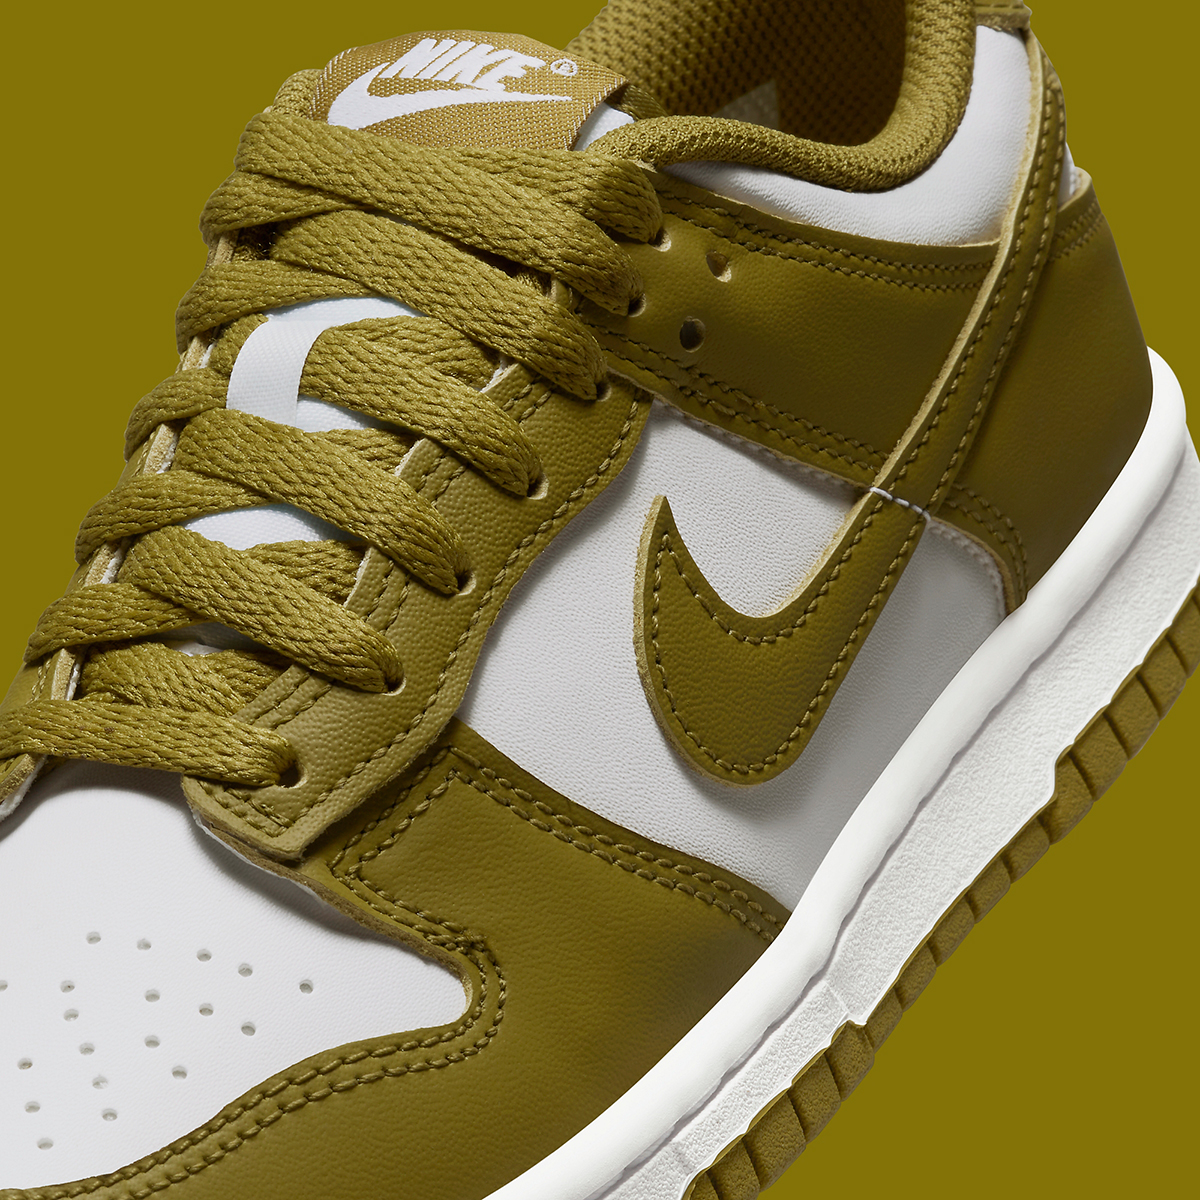 Pacific Moss Grows On The Nike Dunk Low - SneakerNews.com